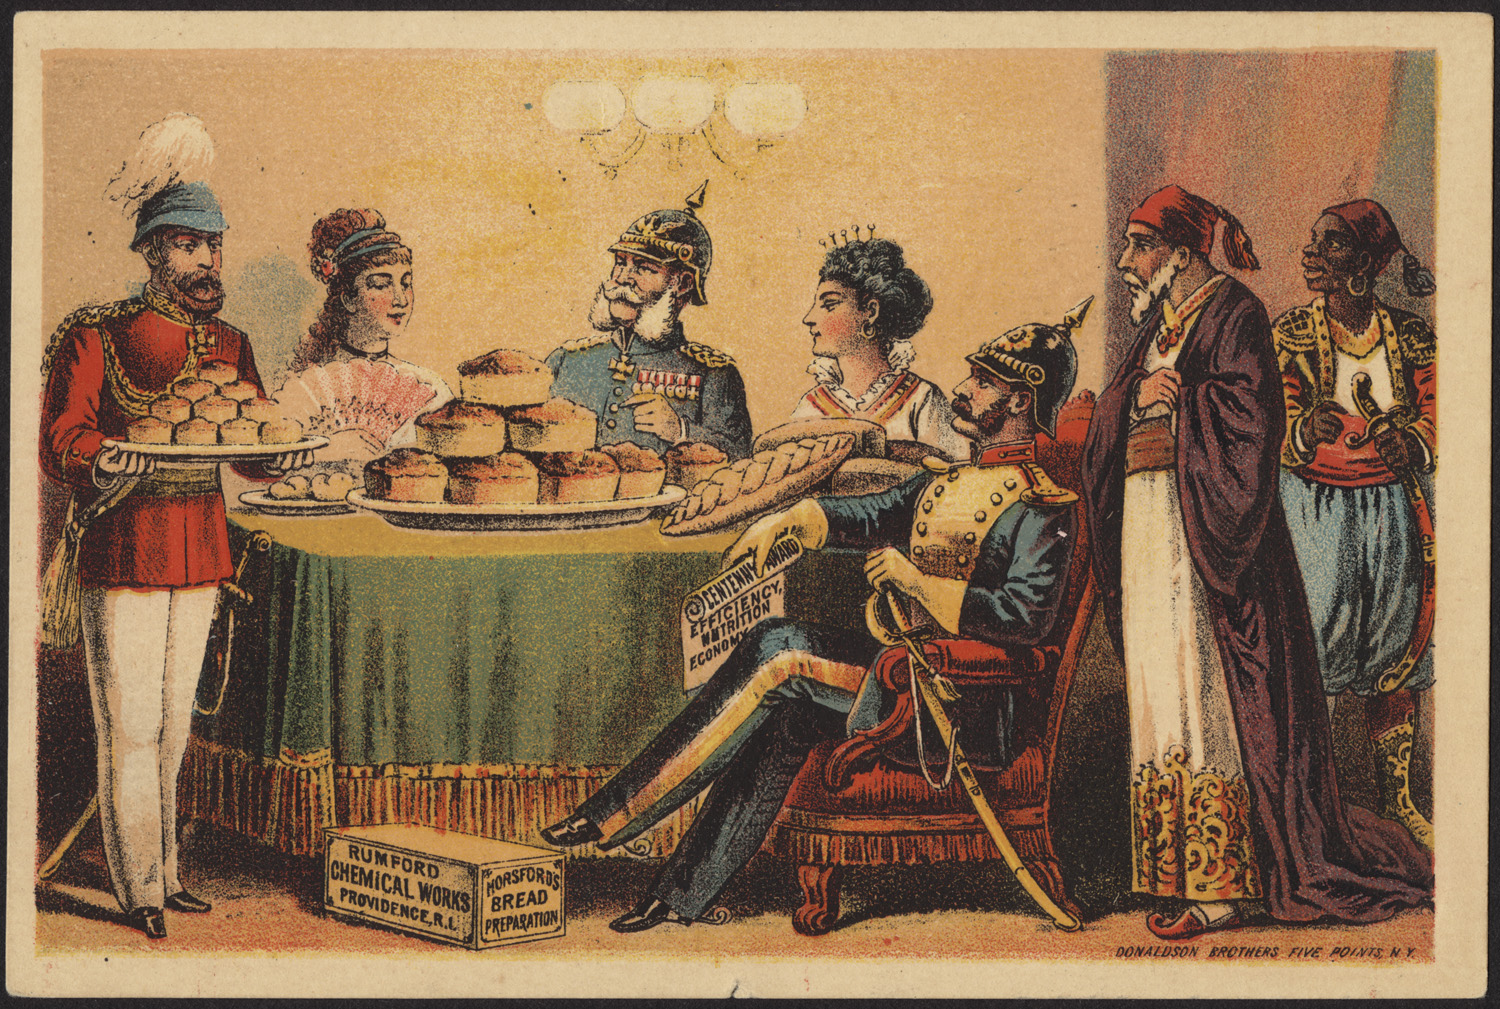 several different men, women, and children dressed in different costumes, having a meal together